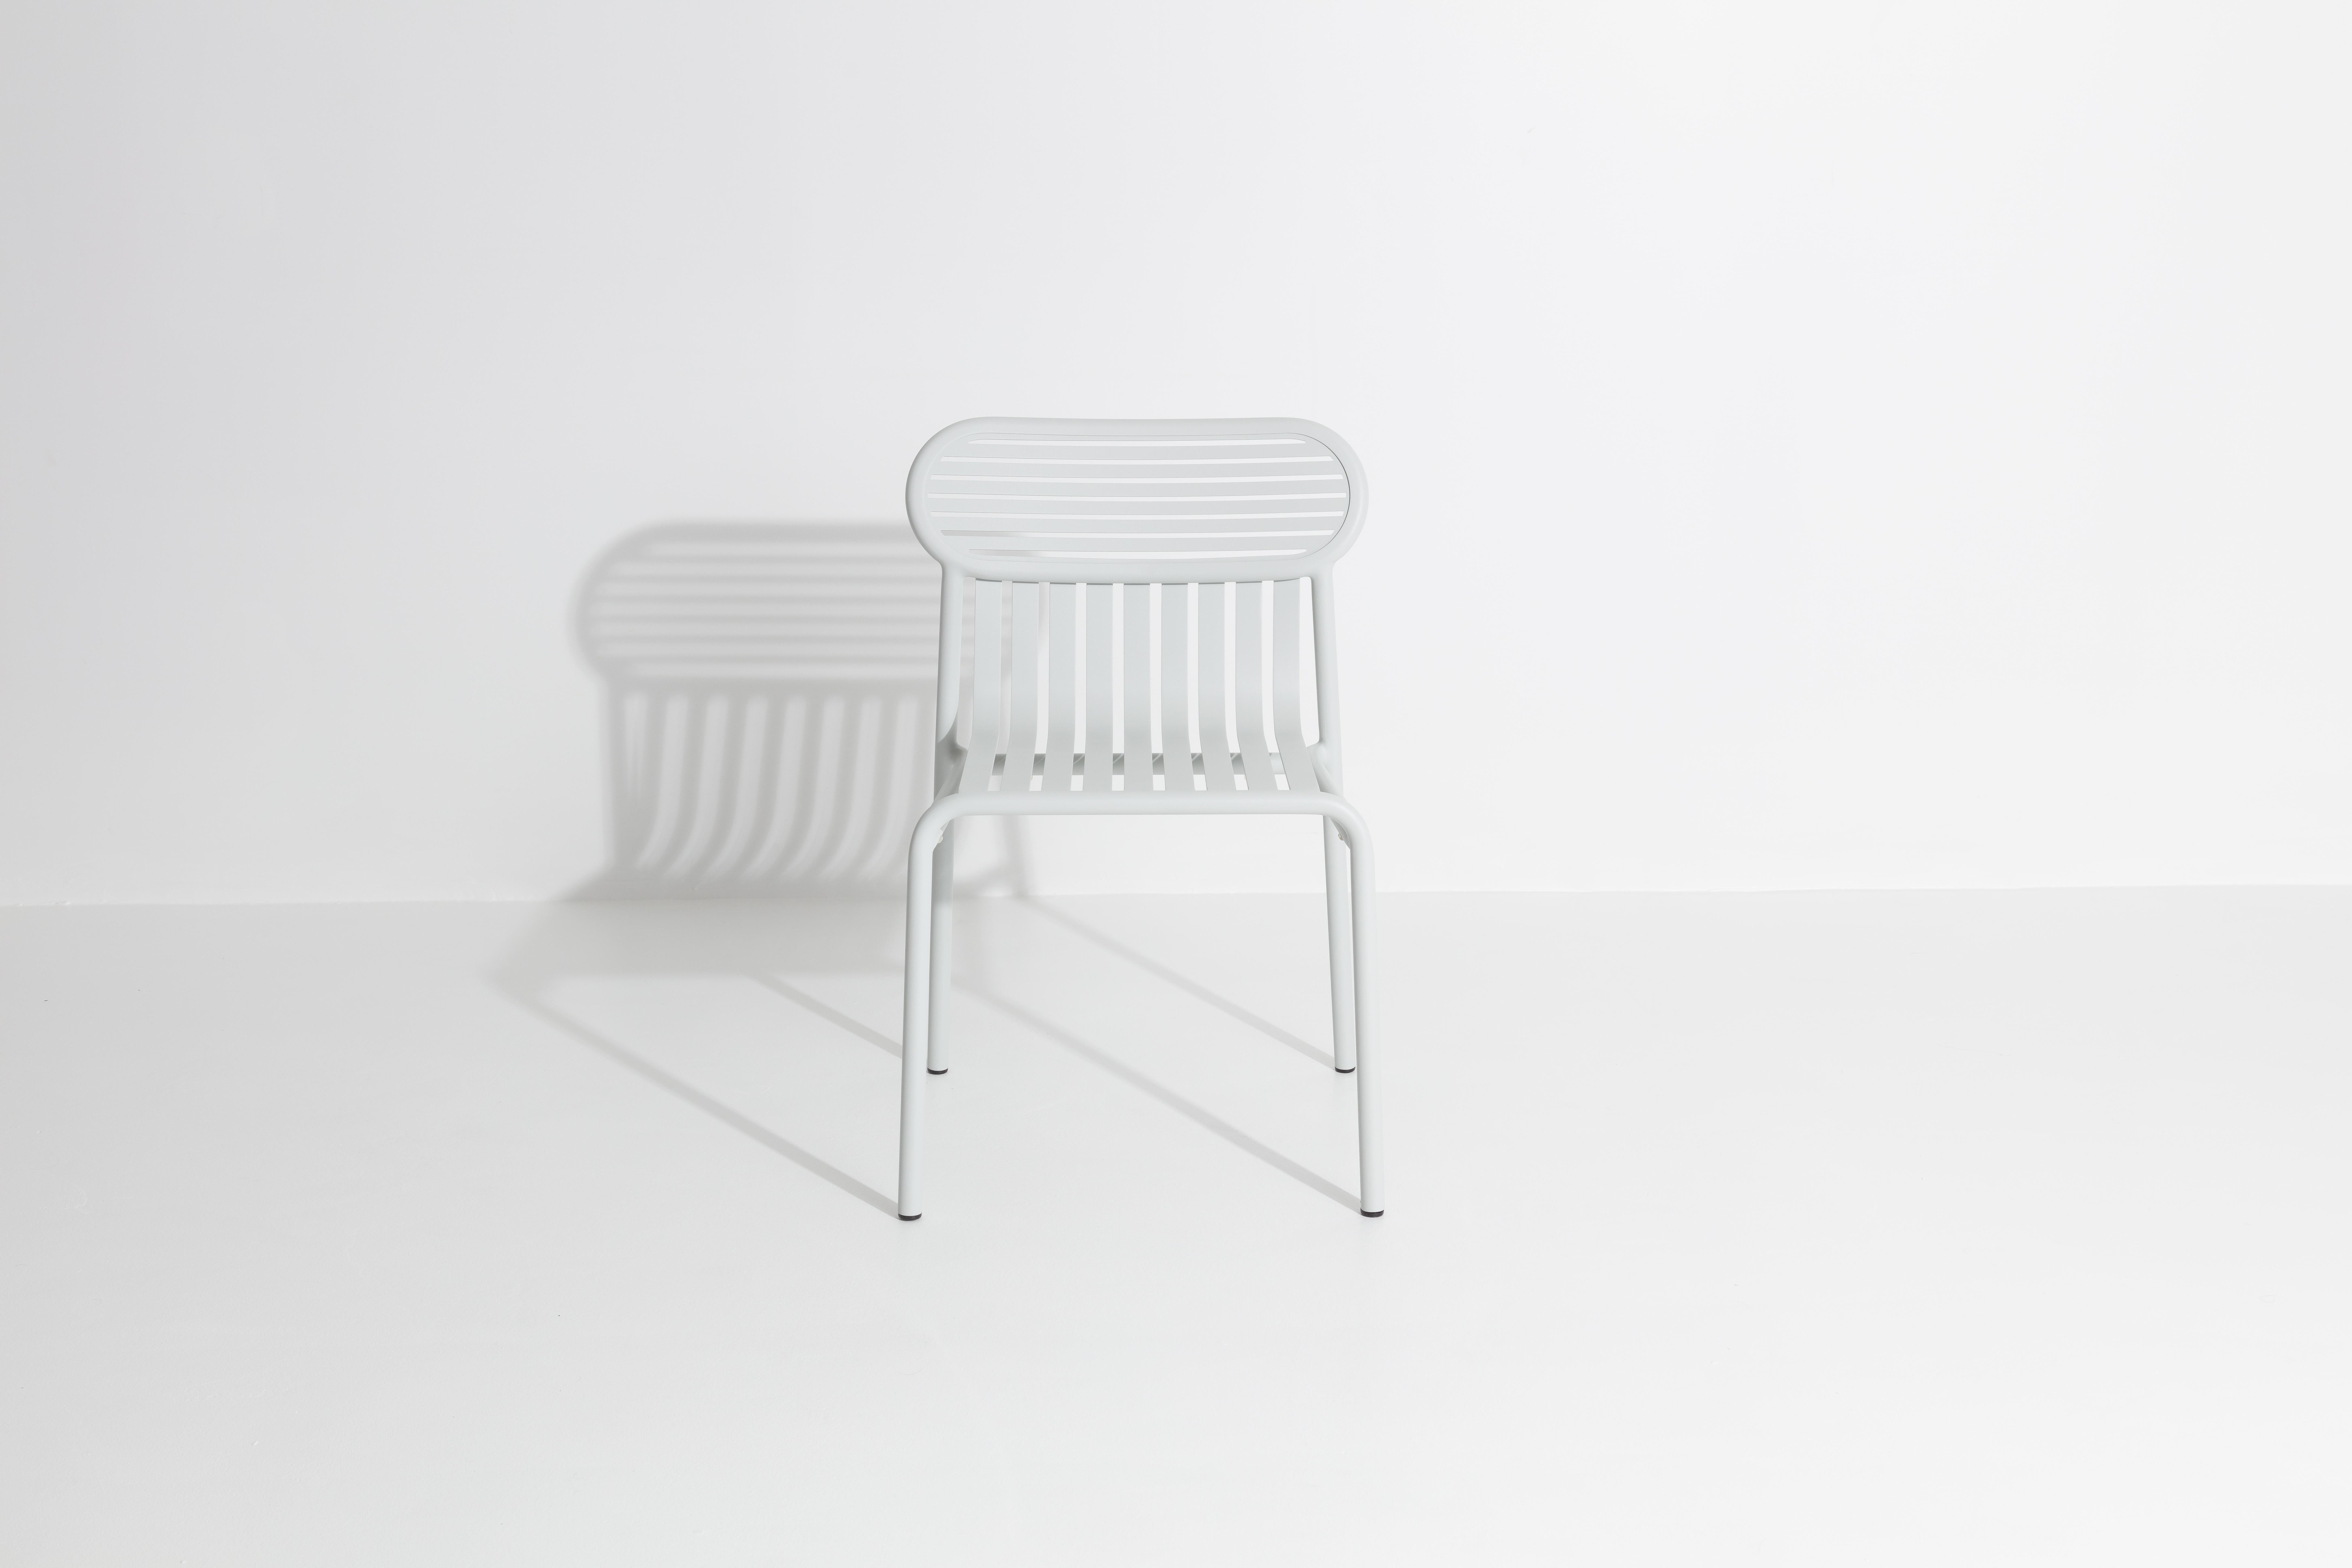 Petite Friture Week-End Chair in Pearl Grey Aluminium by Studio BrichetZiegler, 2017

The week-end collection is a full range of outdoor furniture, in aluminium grained epoxy paint, matt finish, that includes 18 functions and 8 colours for the